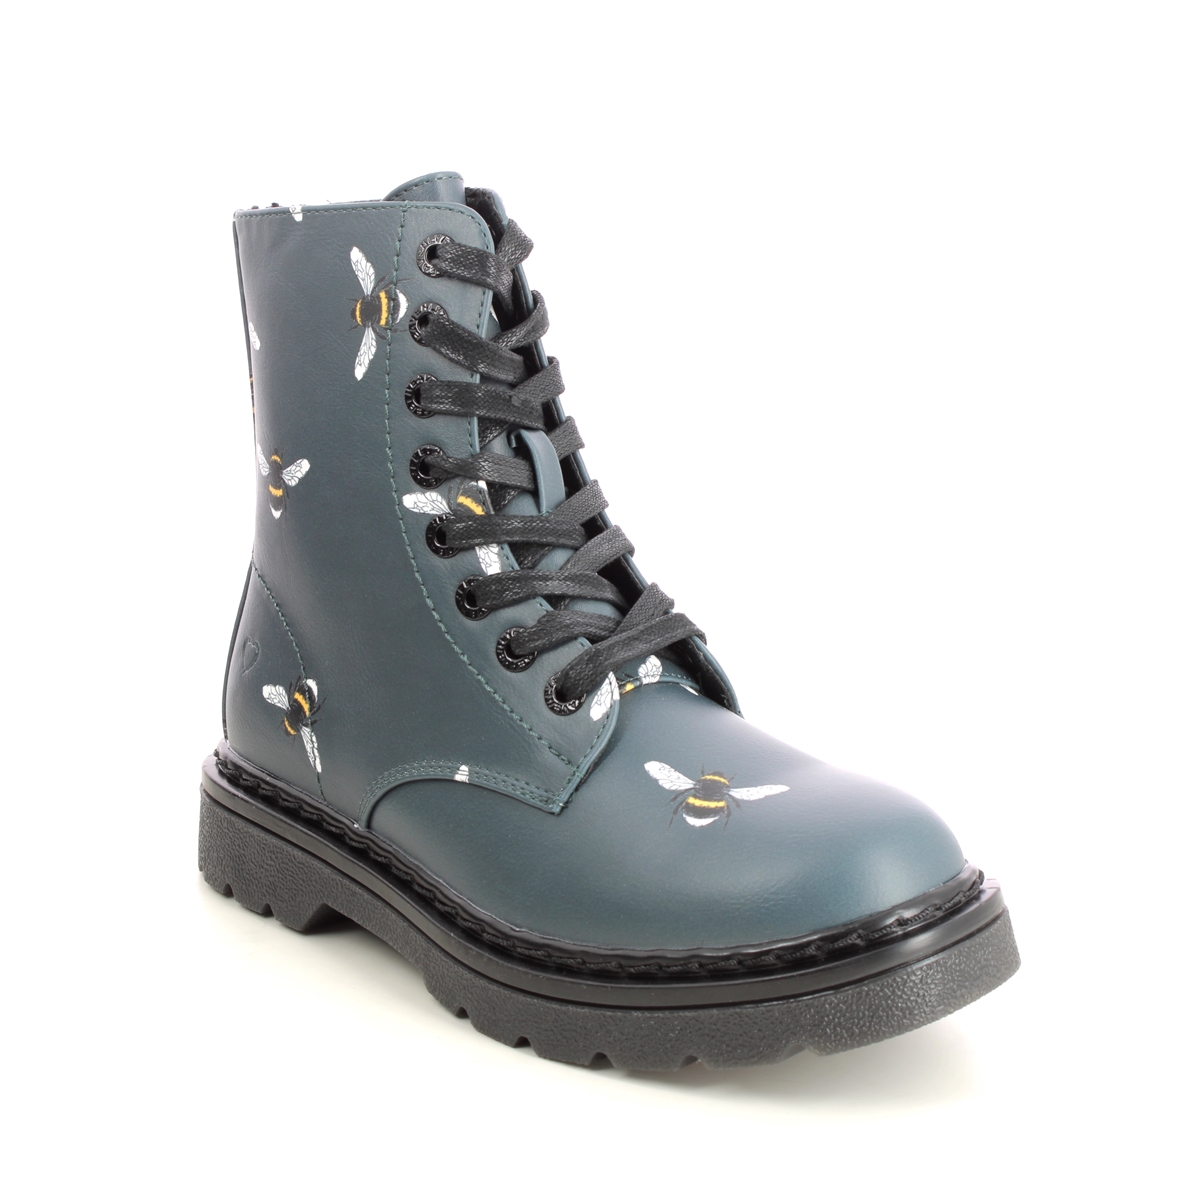 Heavenly Feet Justina 2 Bee Teal Blue Womens Biker Boots 3501-73 In Size 8 In Plain Teal Blue